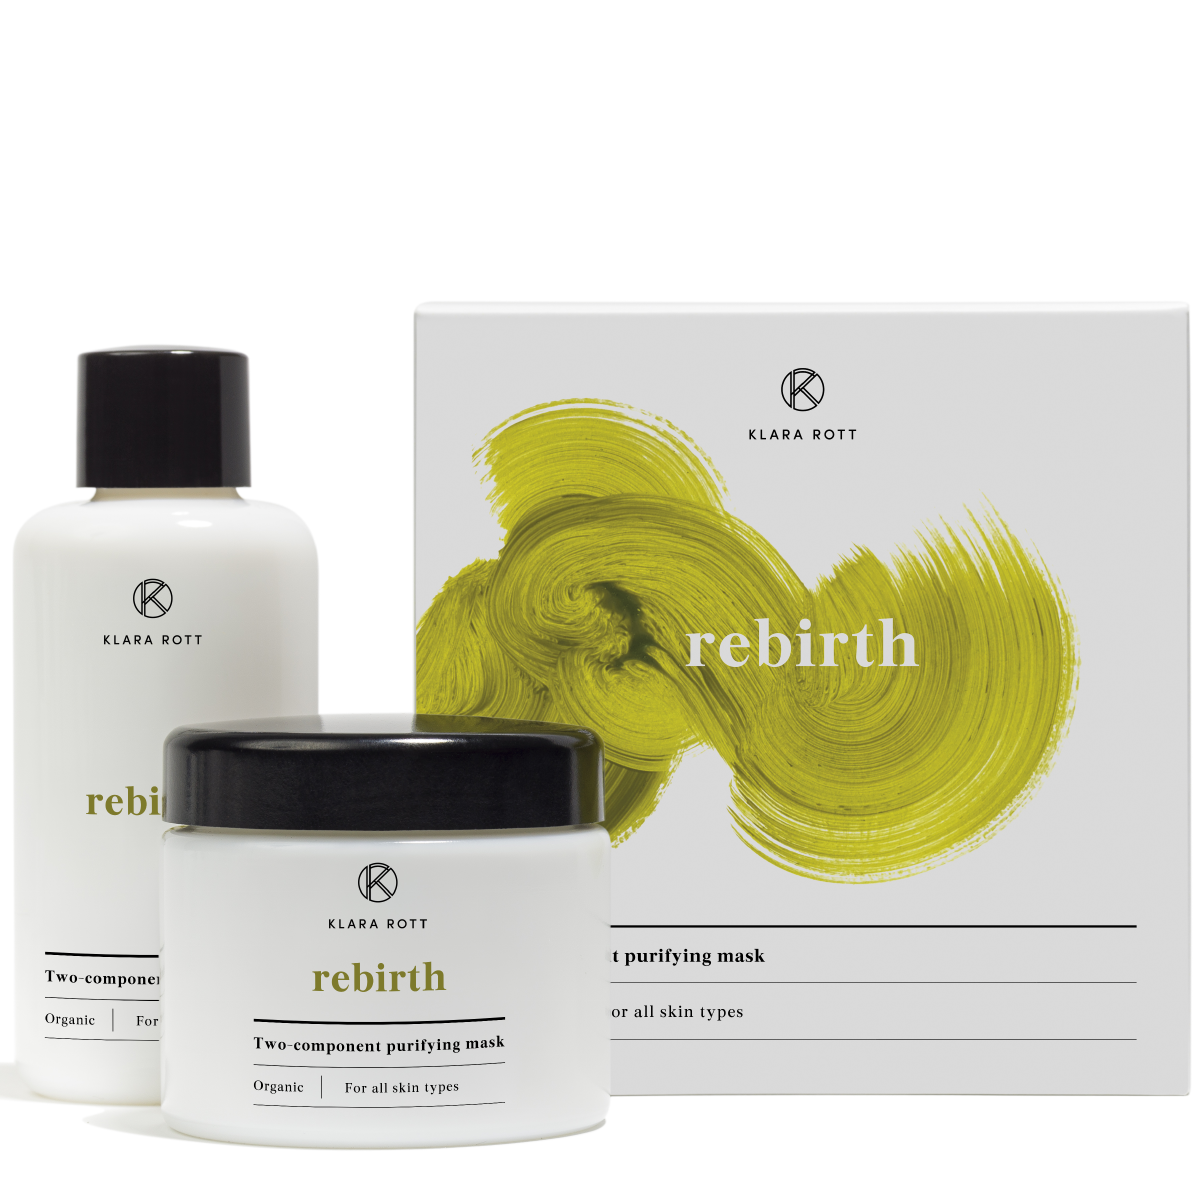 Rebirth - Two-component purifying mask 